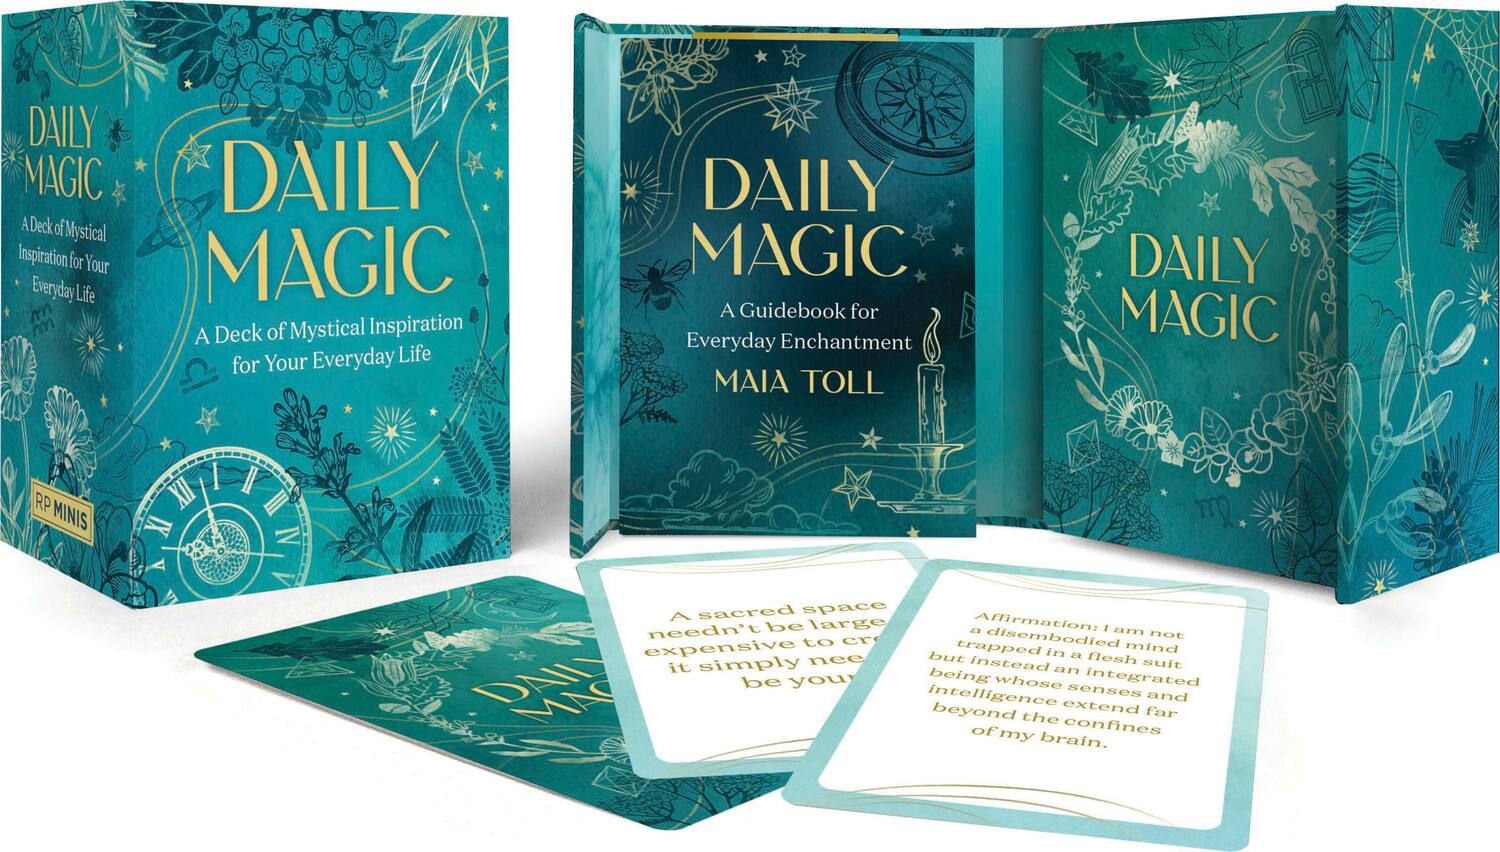 Daily Magic: A Deck of Mystical Inspiration for Your Everyday Life